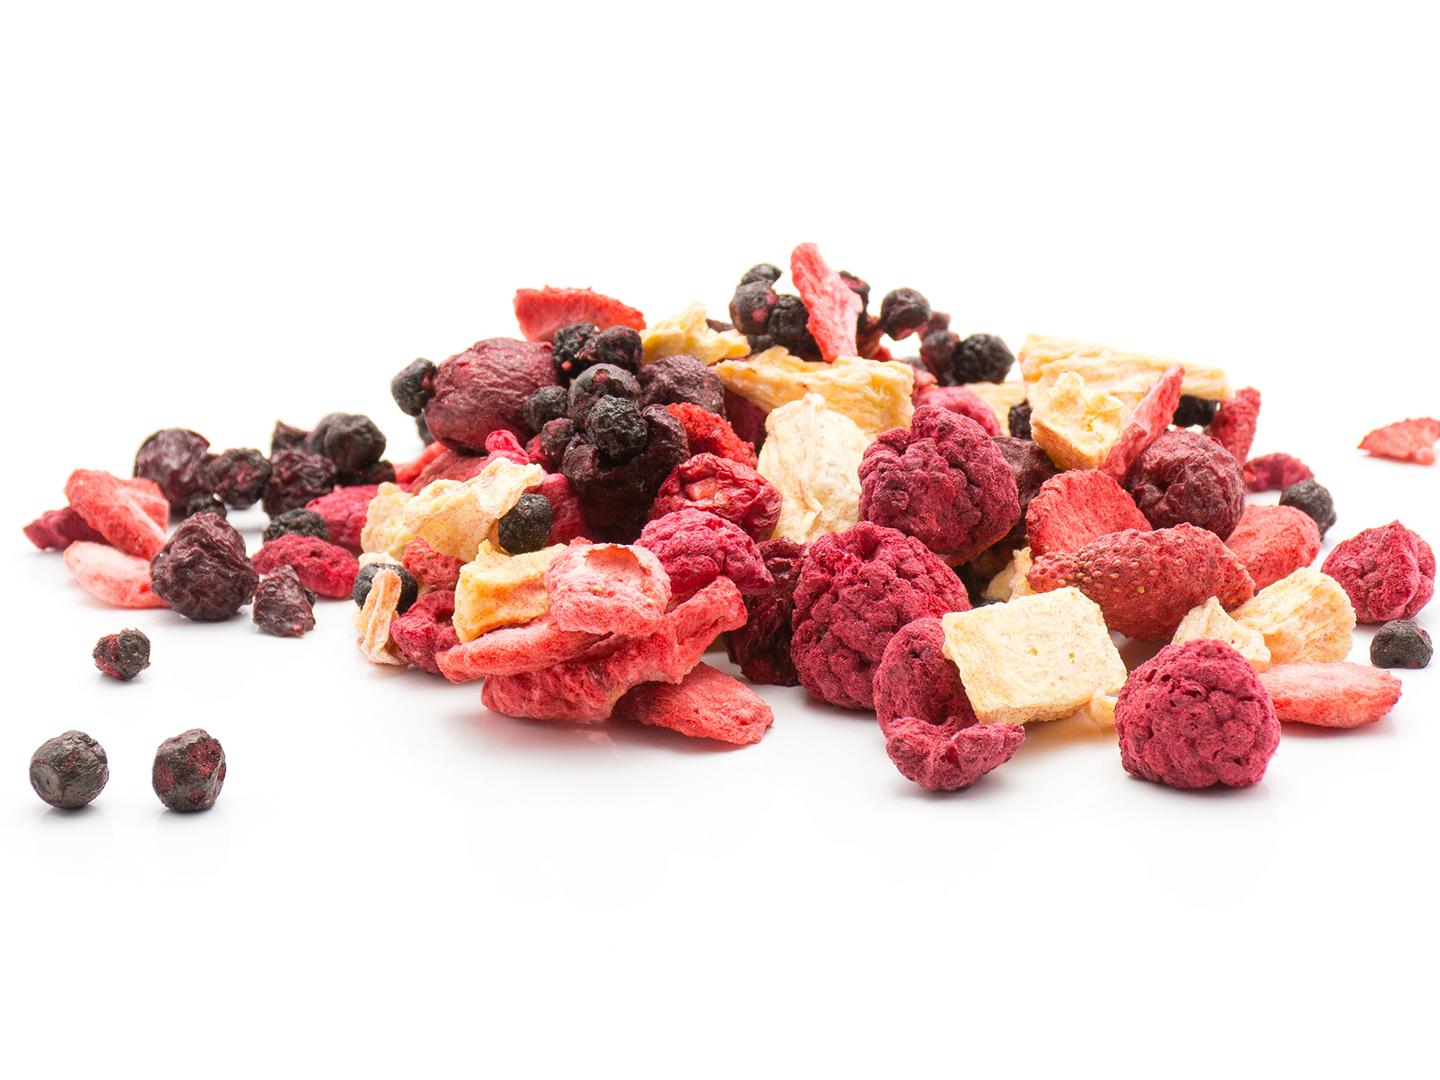 Should I Eat Freeze-Dried Fruits And Vegetables?